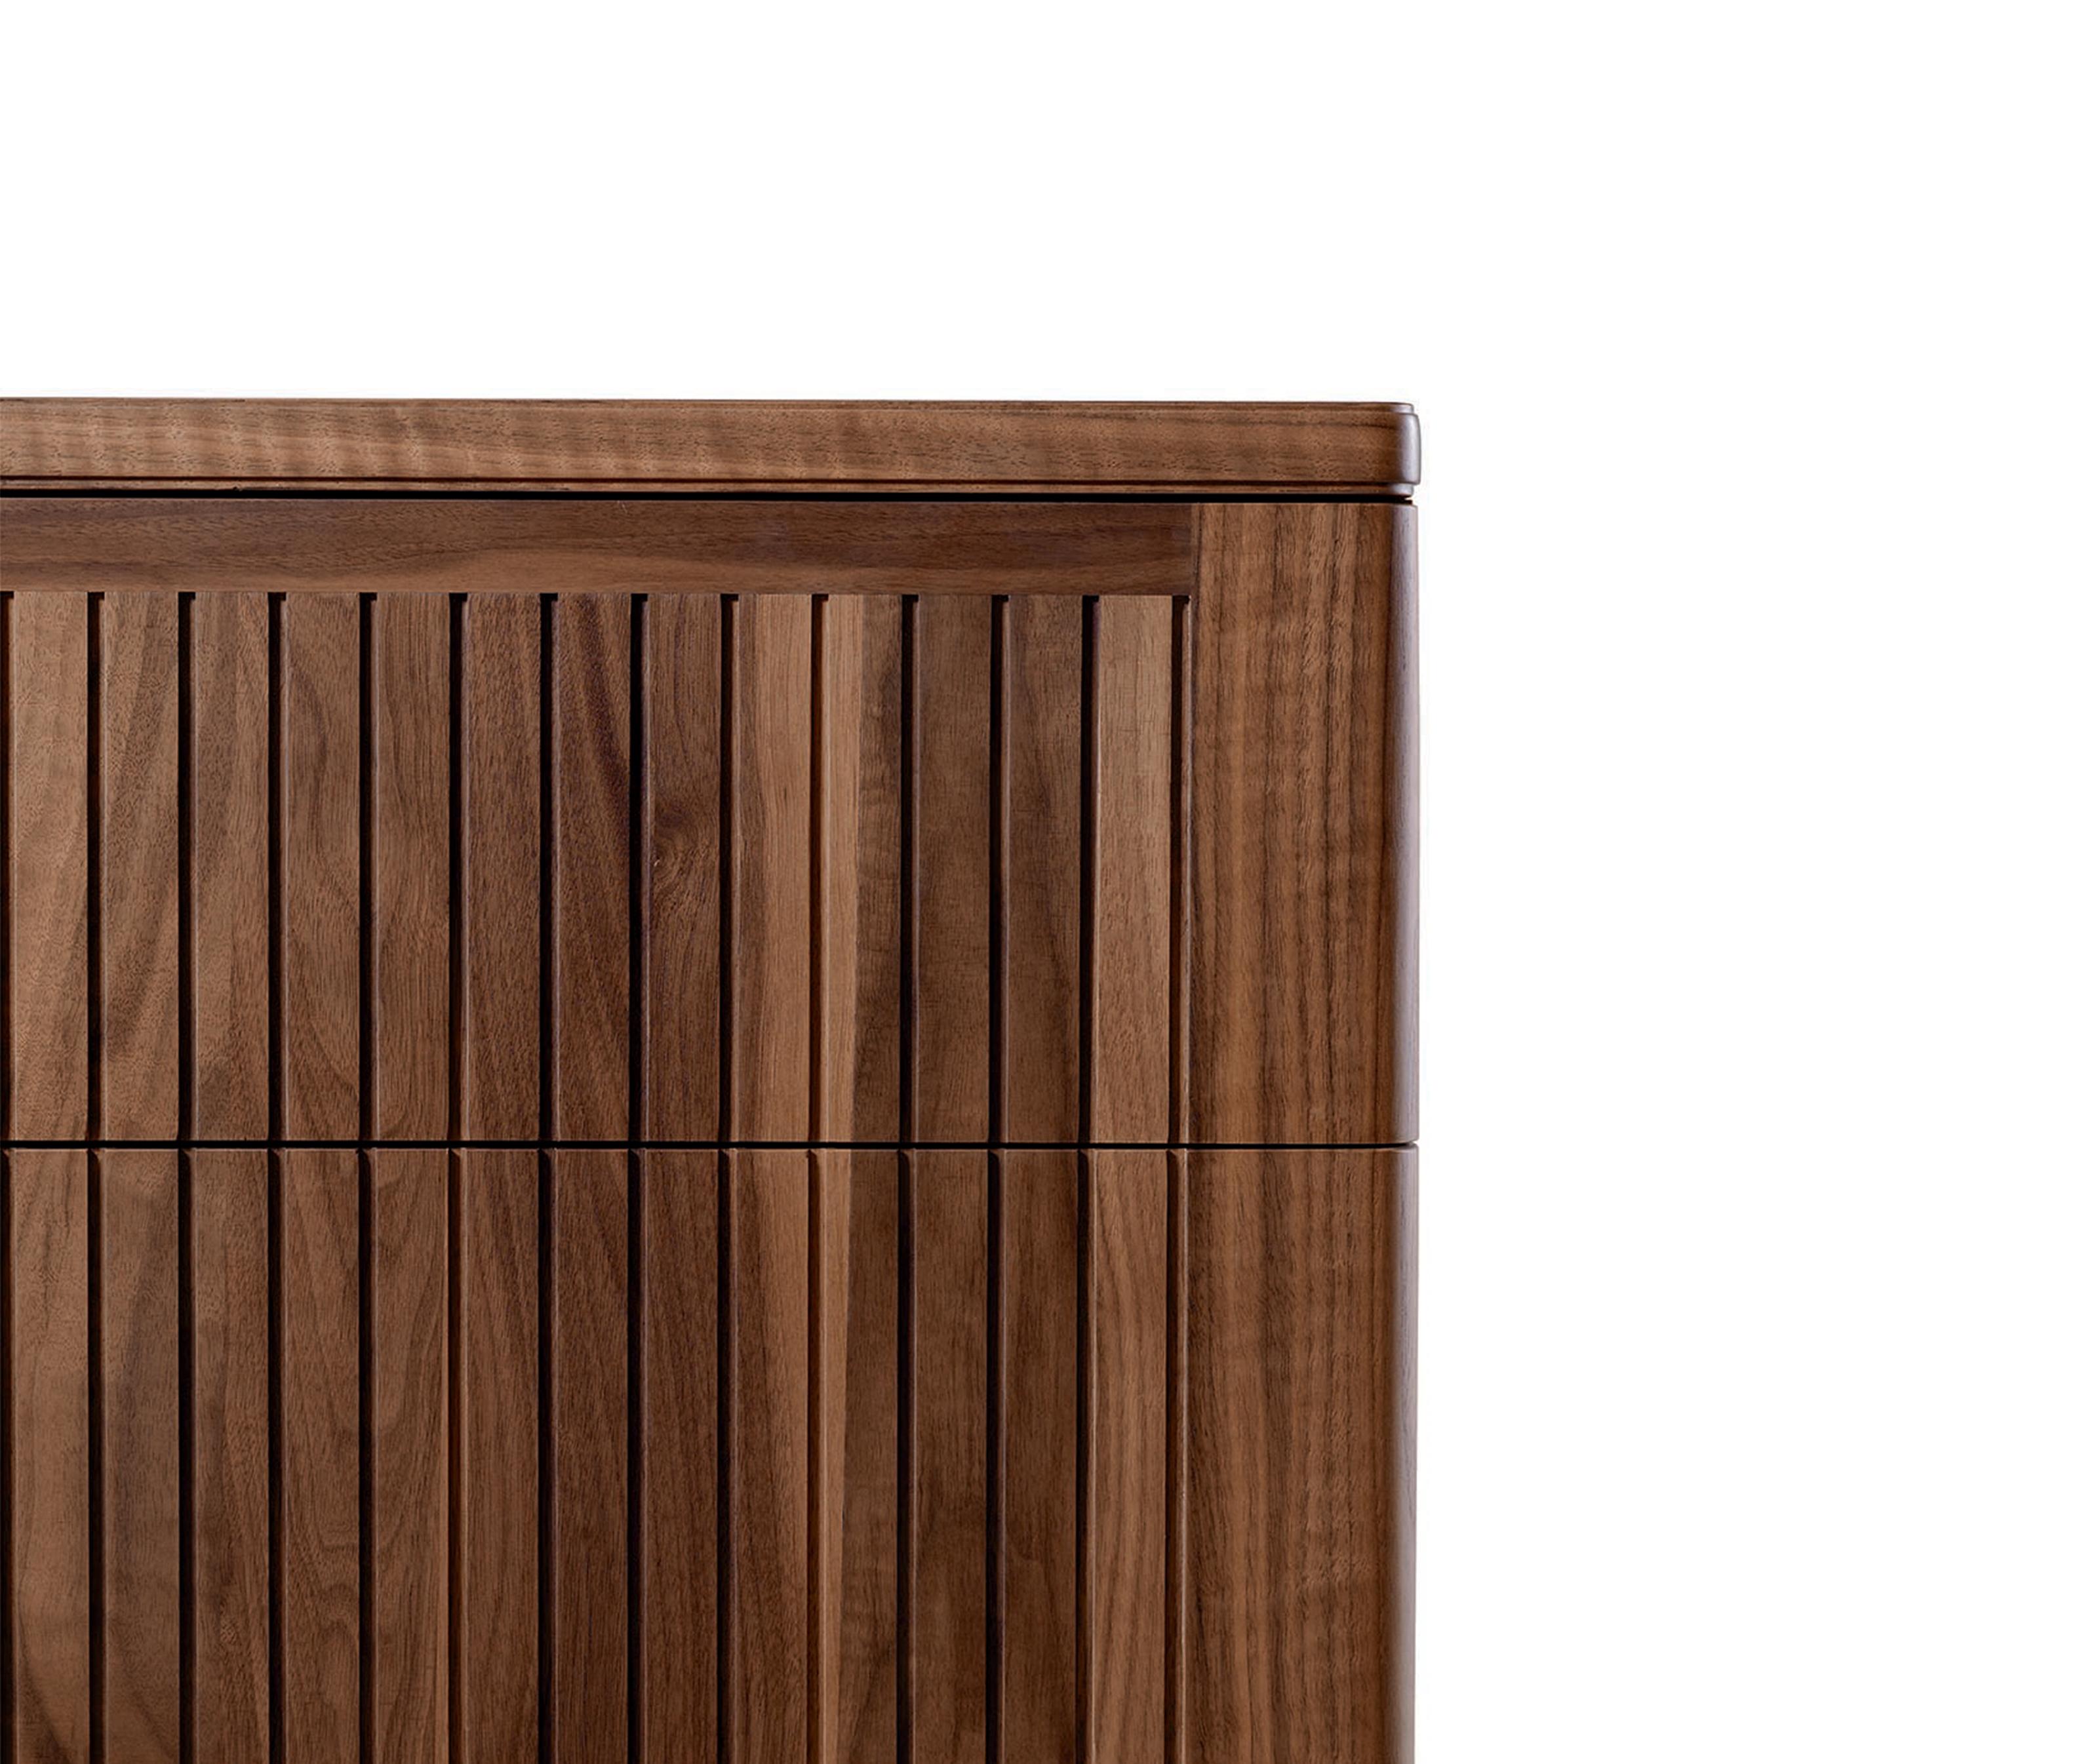 Oiled Eleva Solid Wood Bedside table, Walnut in Hand-Made Natural Finish, Contemporary For Sale